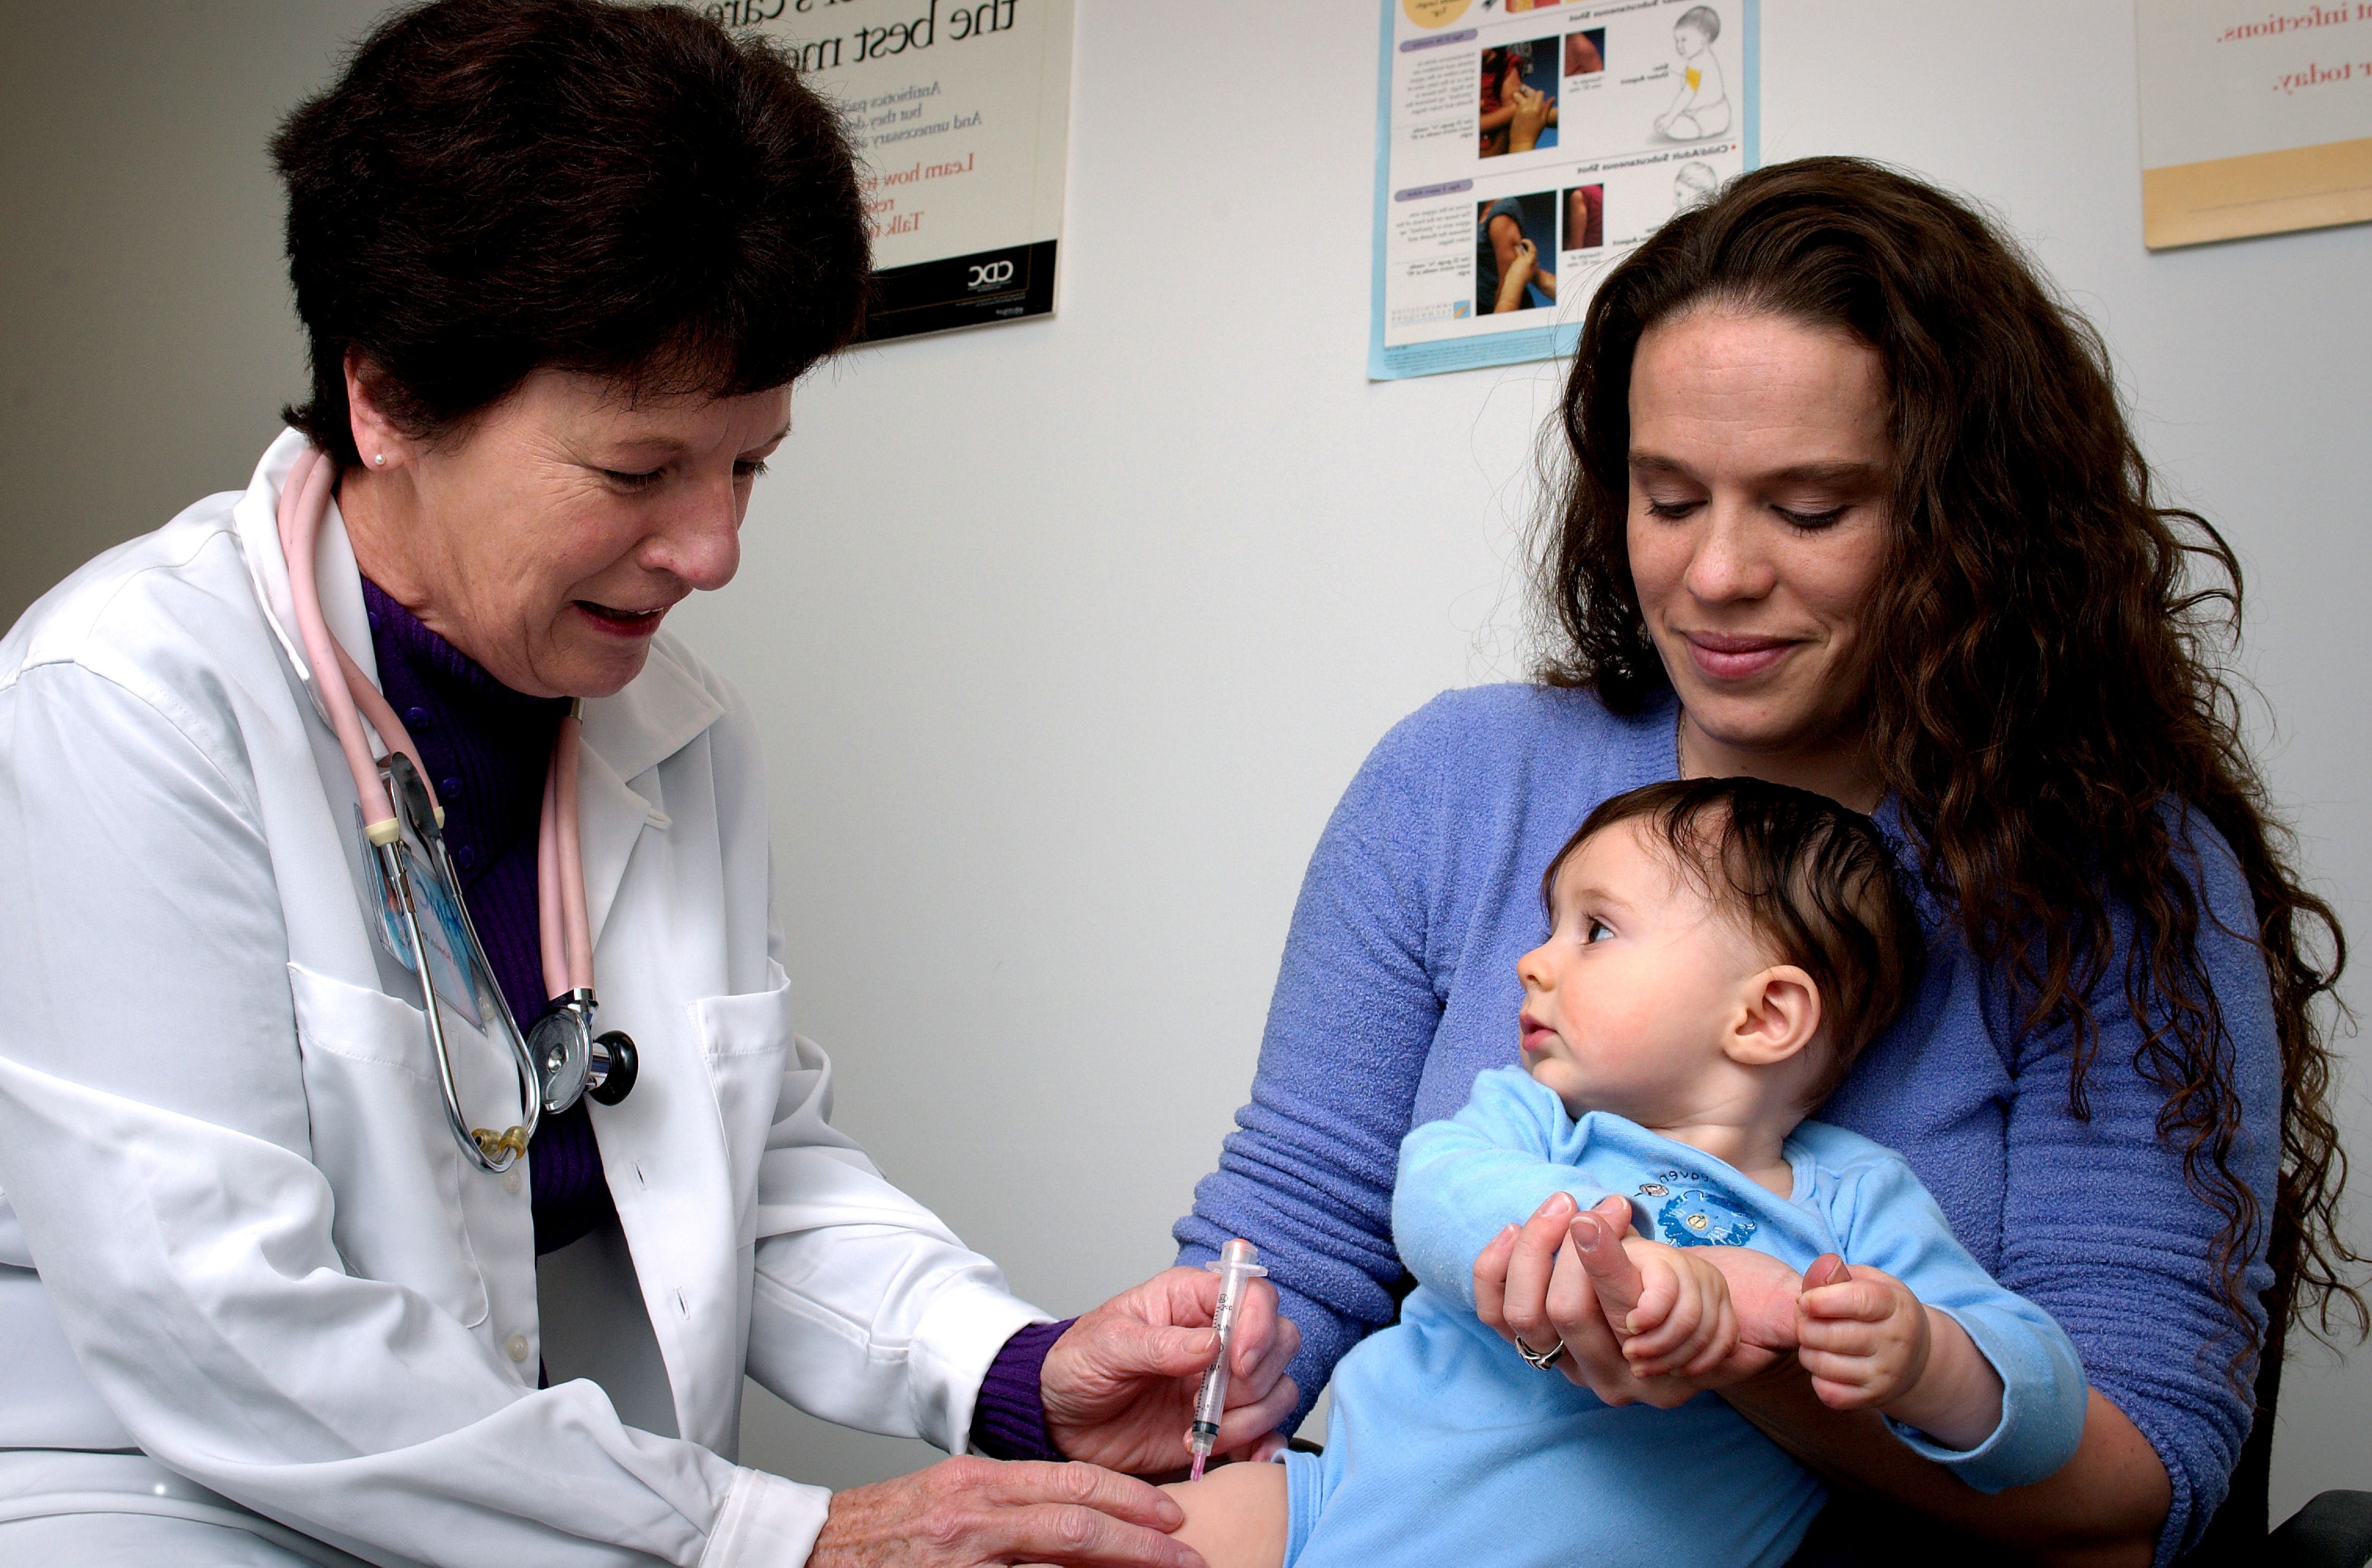 Immunization is one of the most important things a parent can do